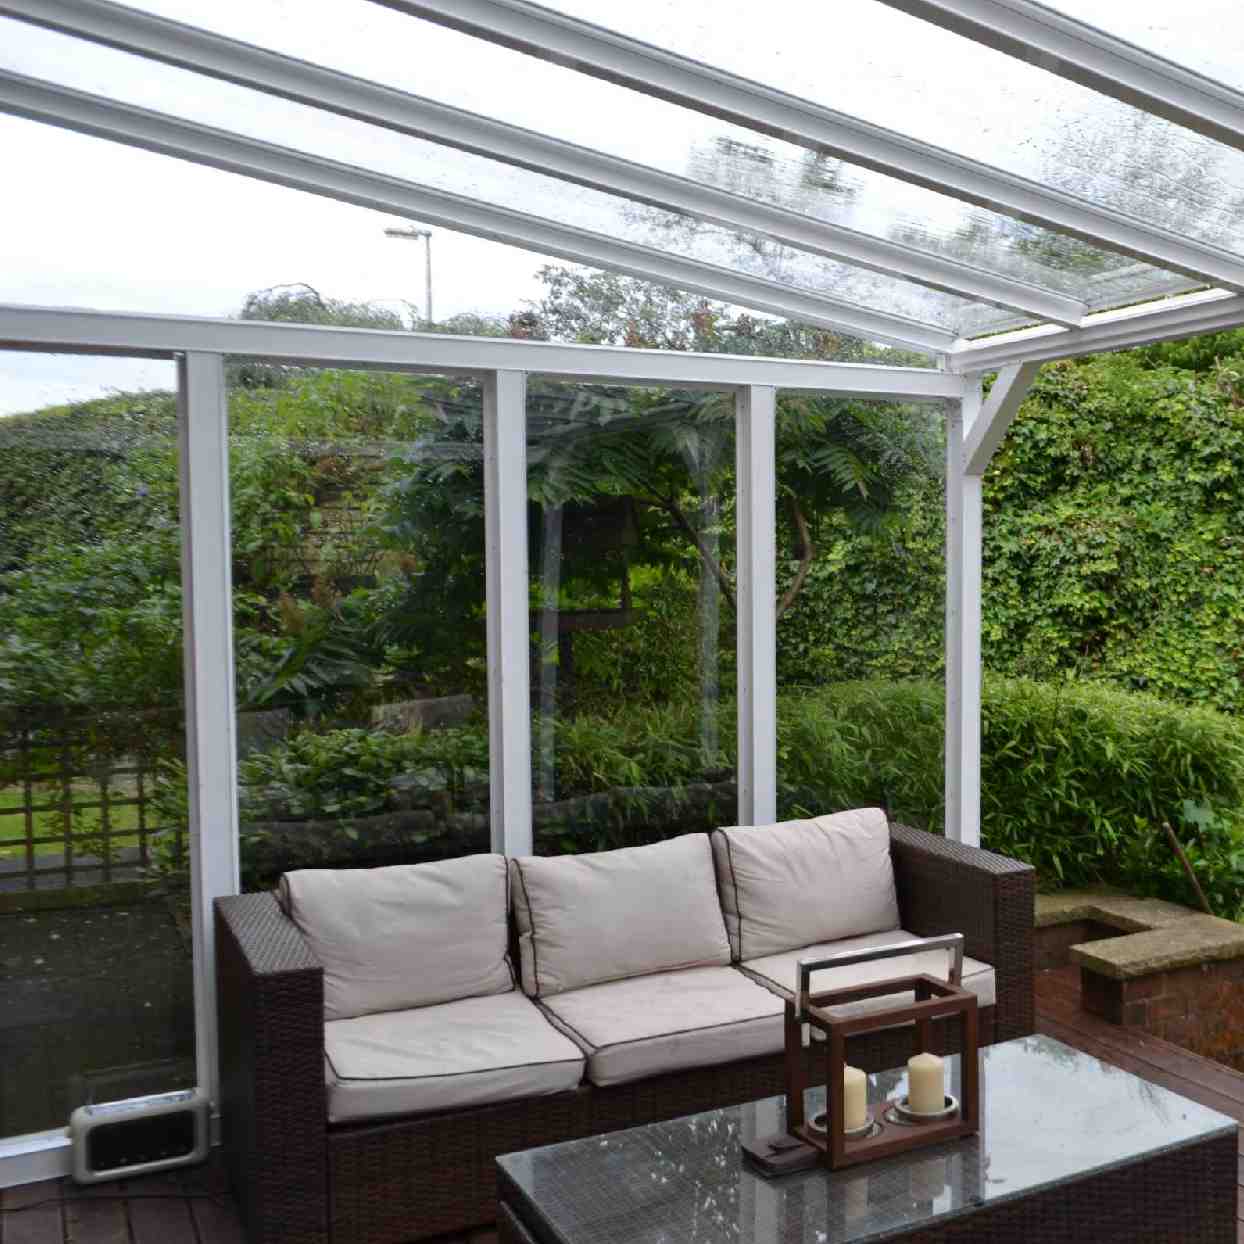 Buy Omega Verandah White with 16mm Polycarbonate Glazing - 6.3m (W) x 2.0m (P), (4) Supporting Posts online today